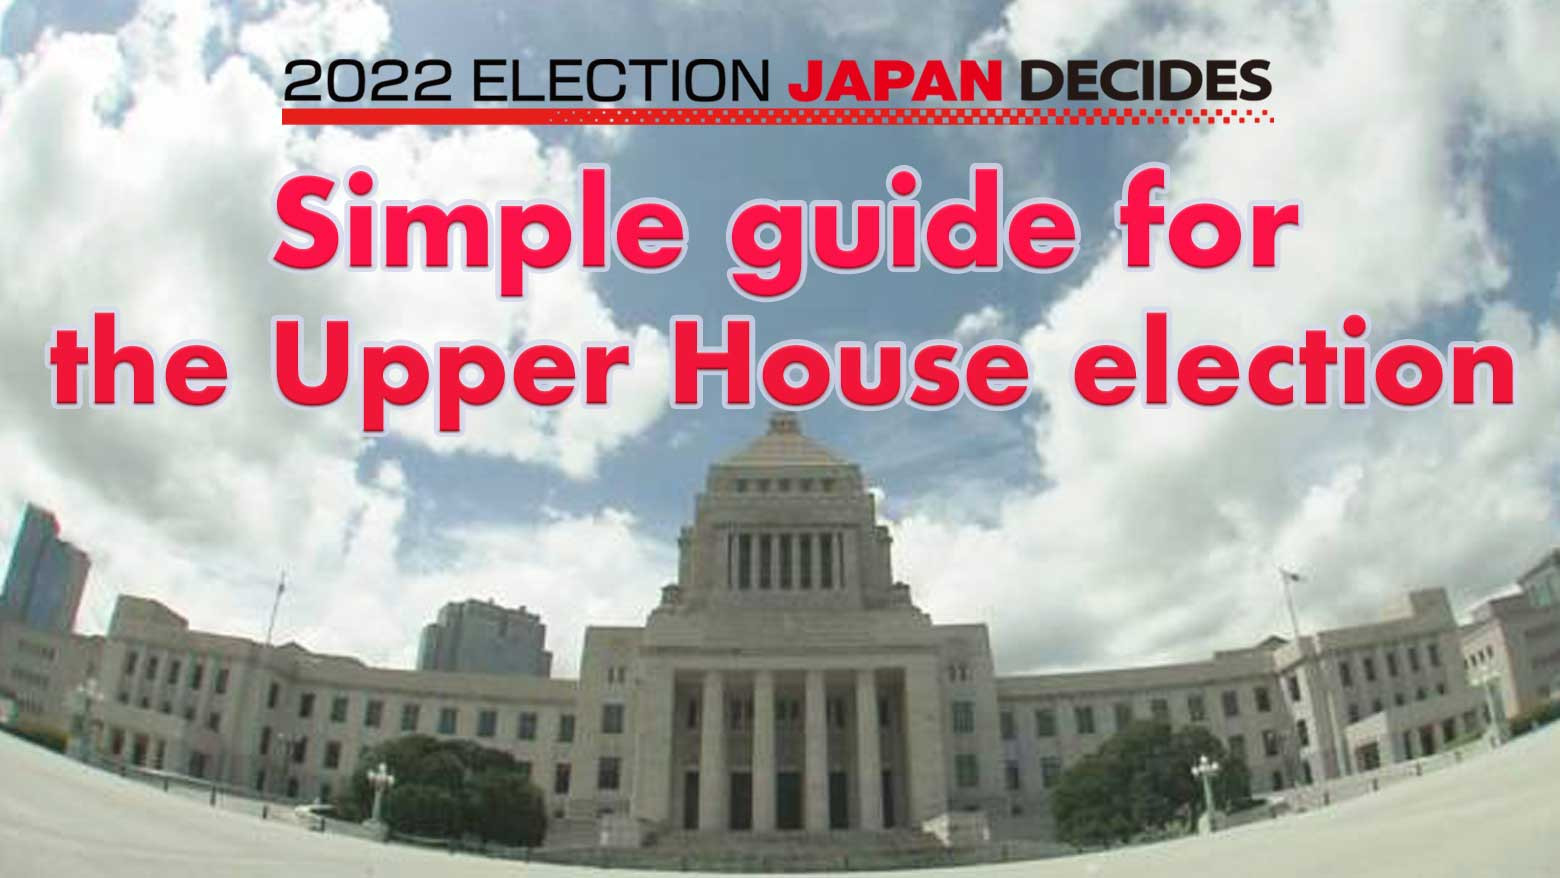 Japan's Upper House election: A really simple guide